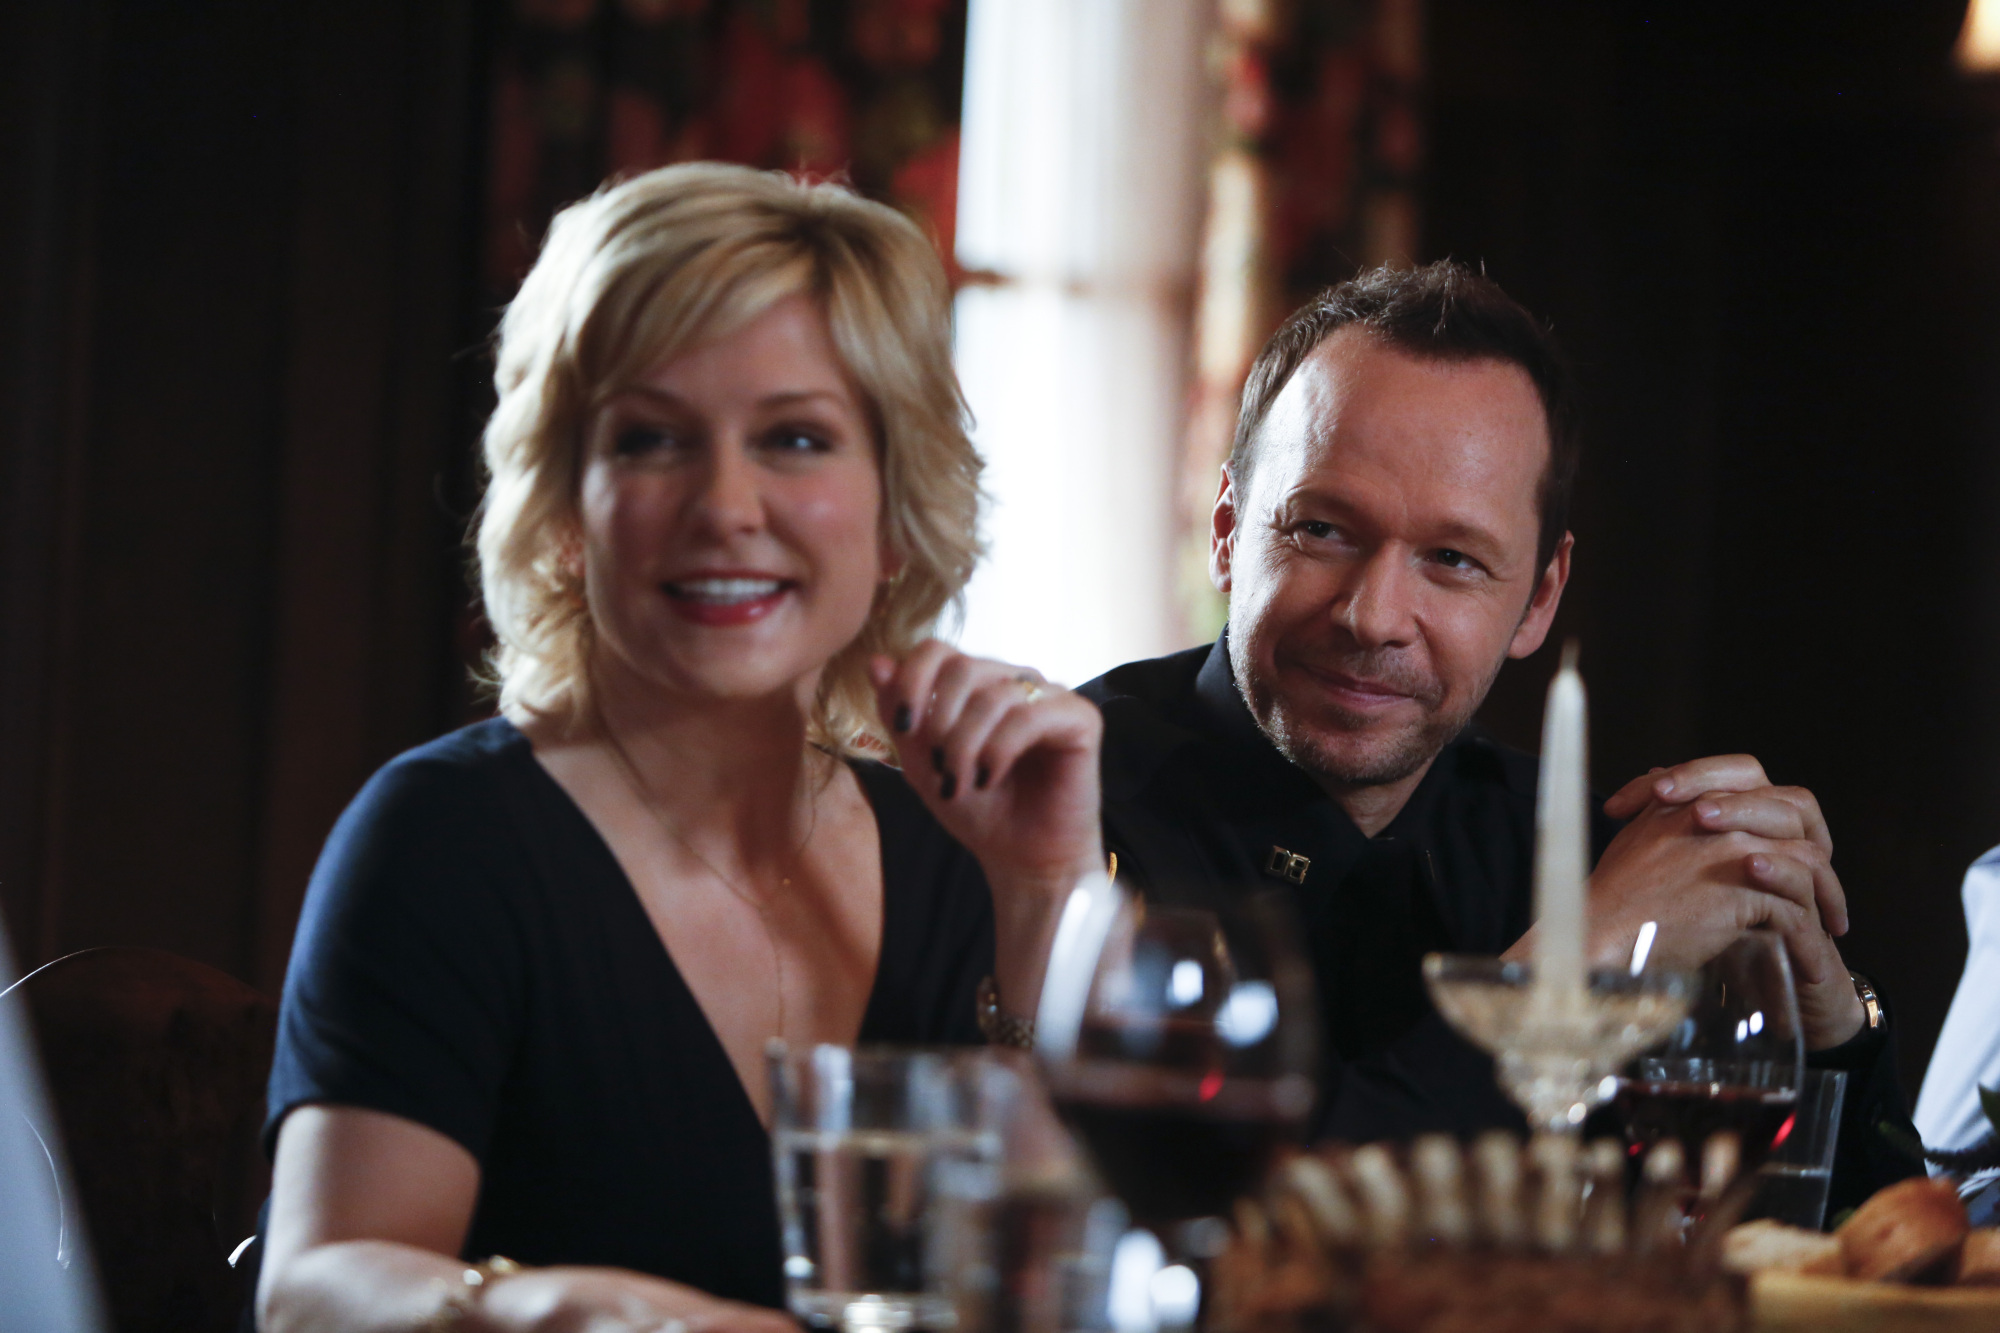 13. Before joining Blue Bloods, Amy Carlson was known for her roles as Alex Taylor in 